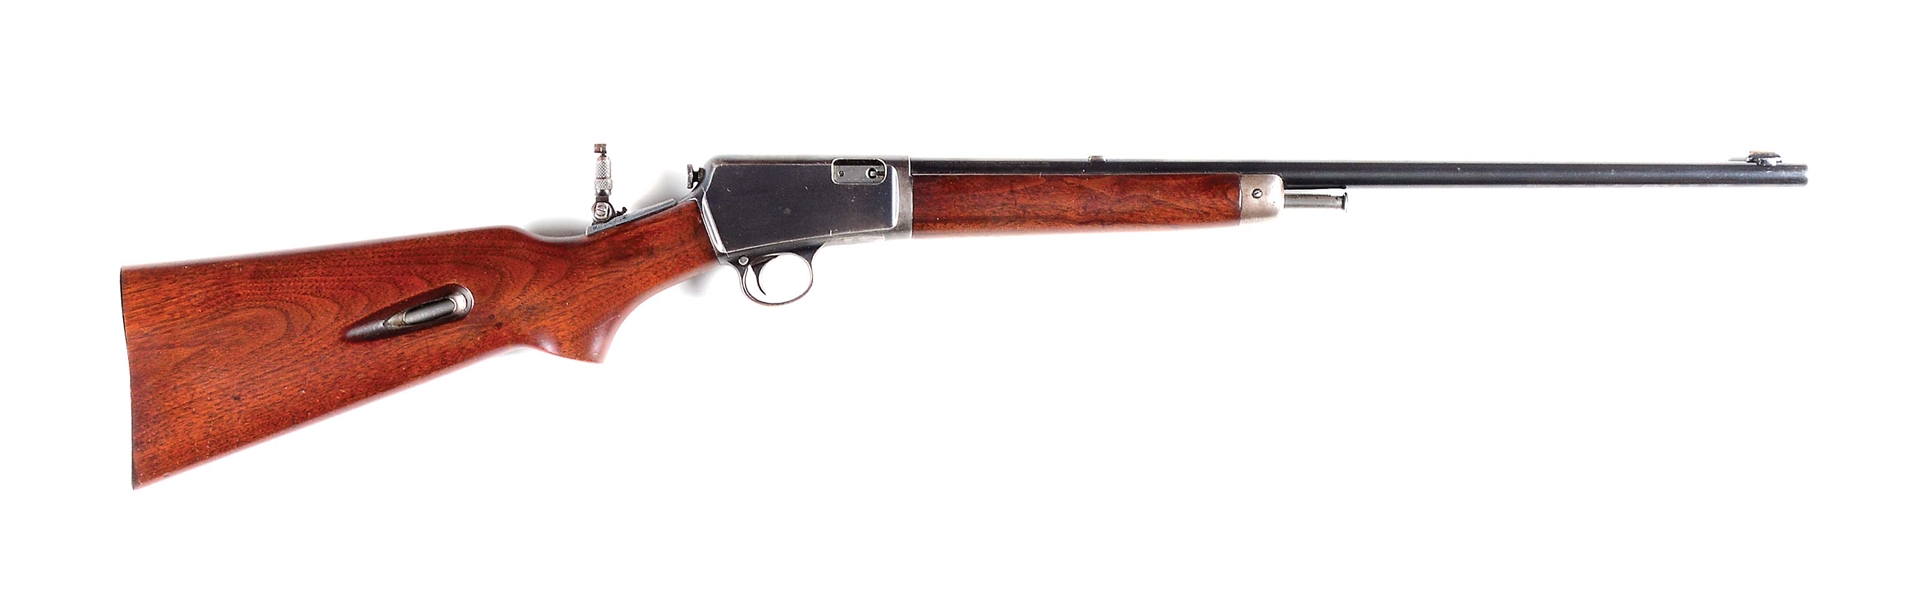 (C) WINCHESTER MODEL 63 SEMI AUTOMATIC RIFLE, SERIAL NUMBER 17.